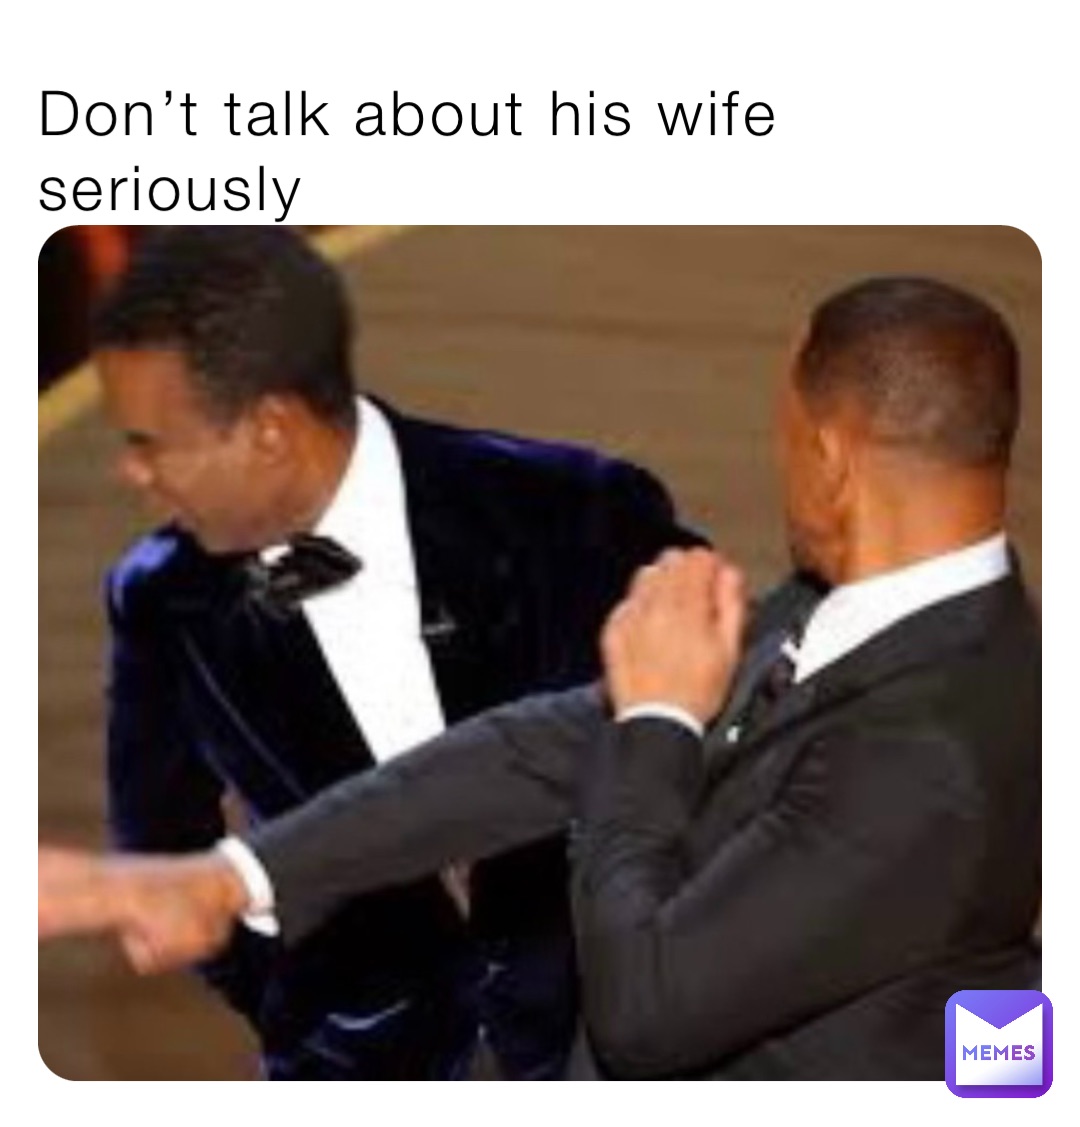 Don’t talk about his wife seriously